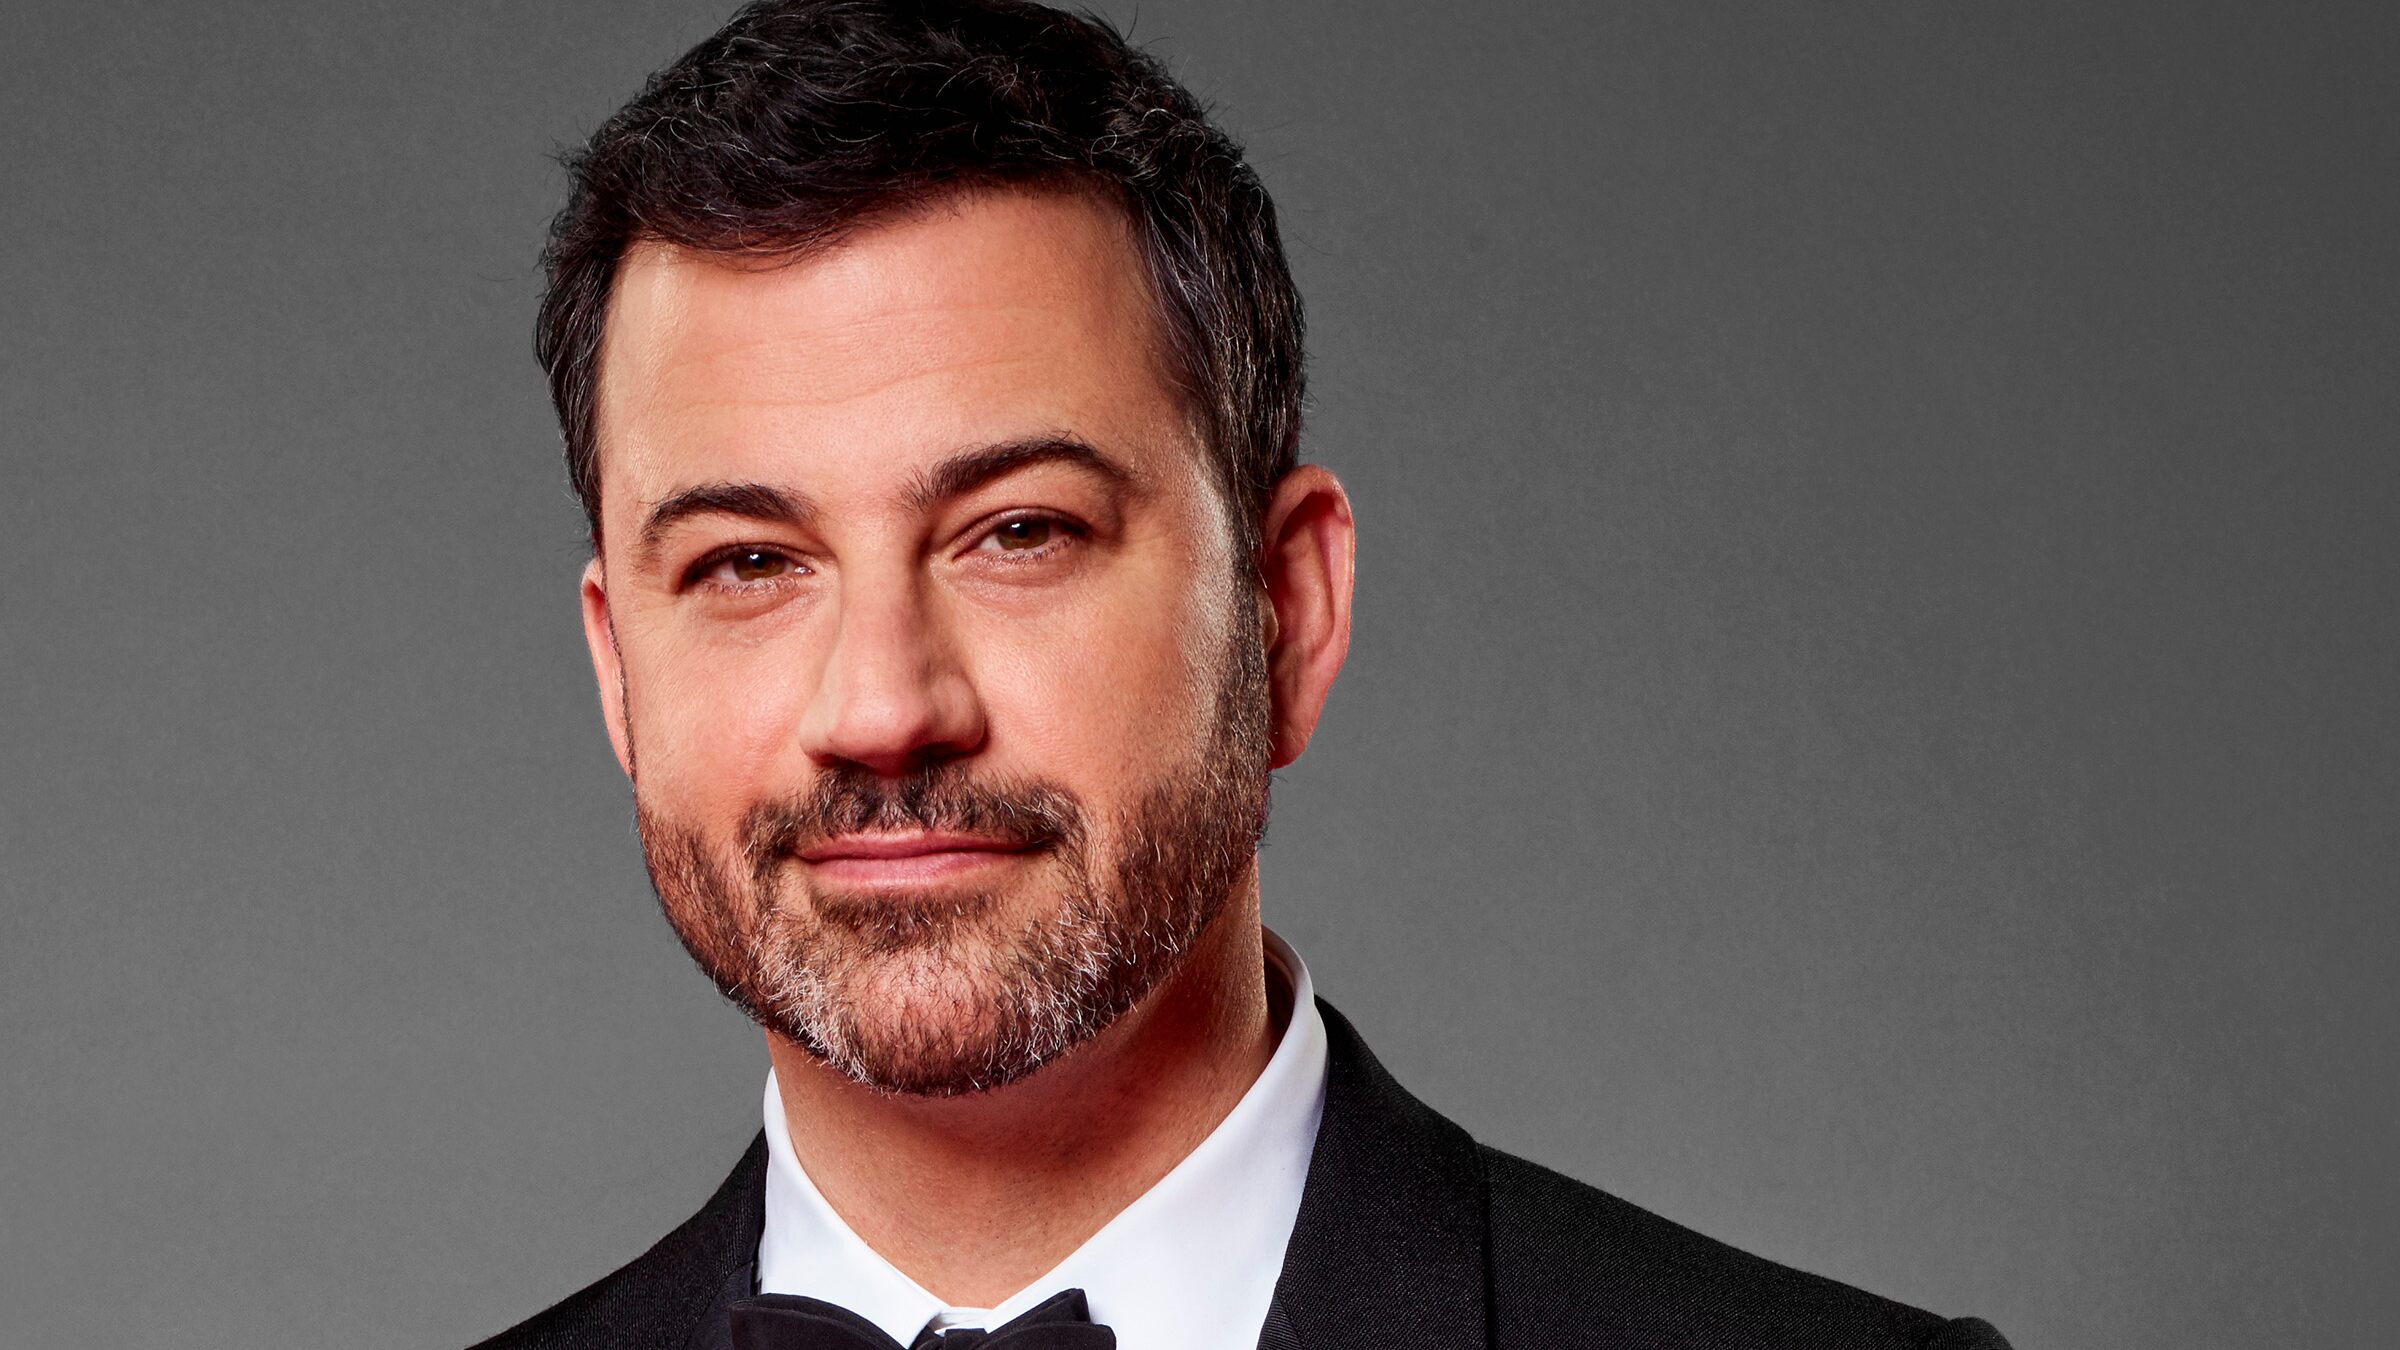 Jimmy Kimmel begins 2020 Emmys with strikes against Coronavirus, and Trump supporters during the inaugural monologue